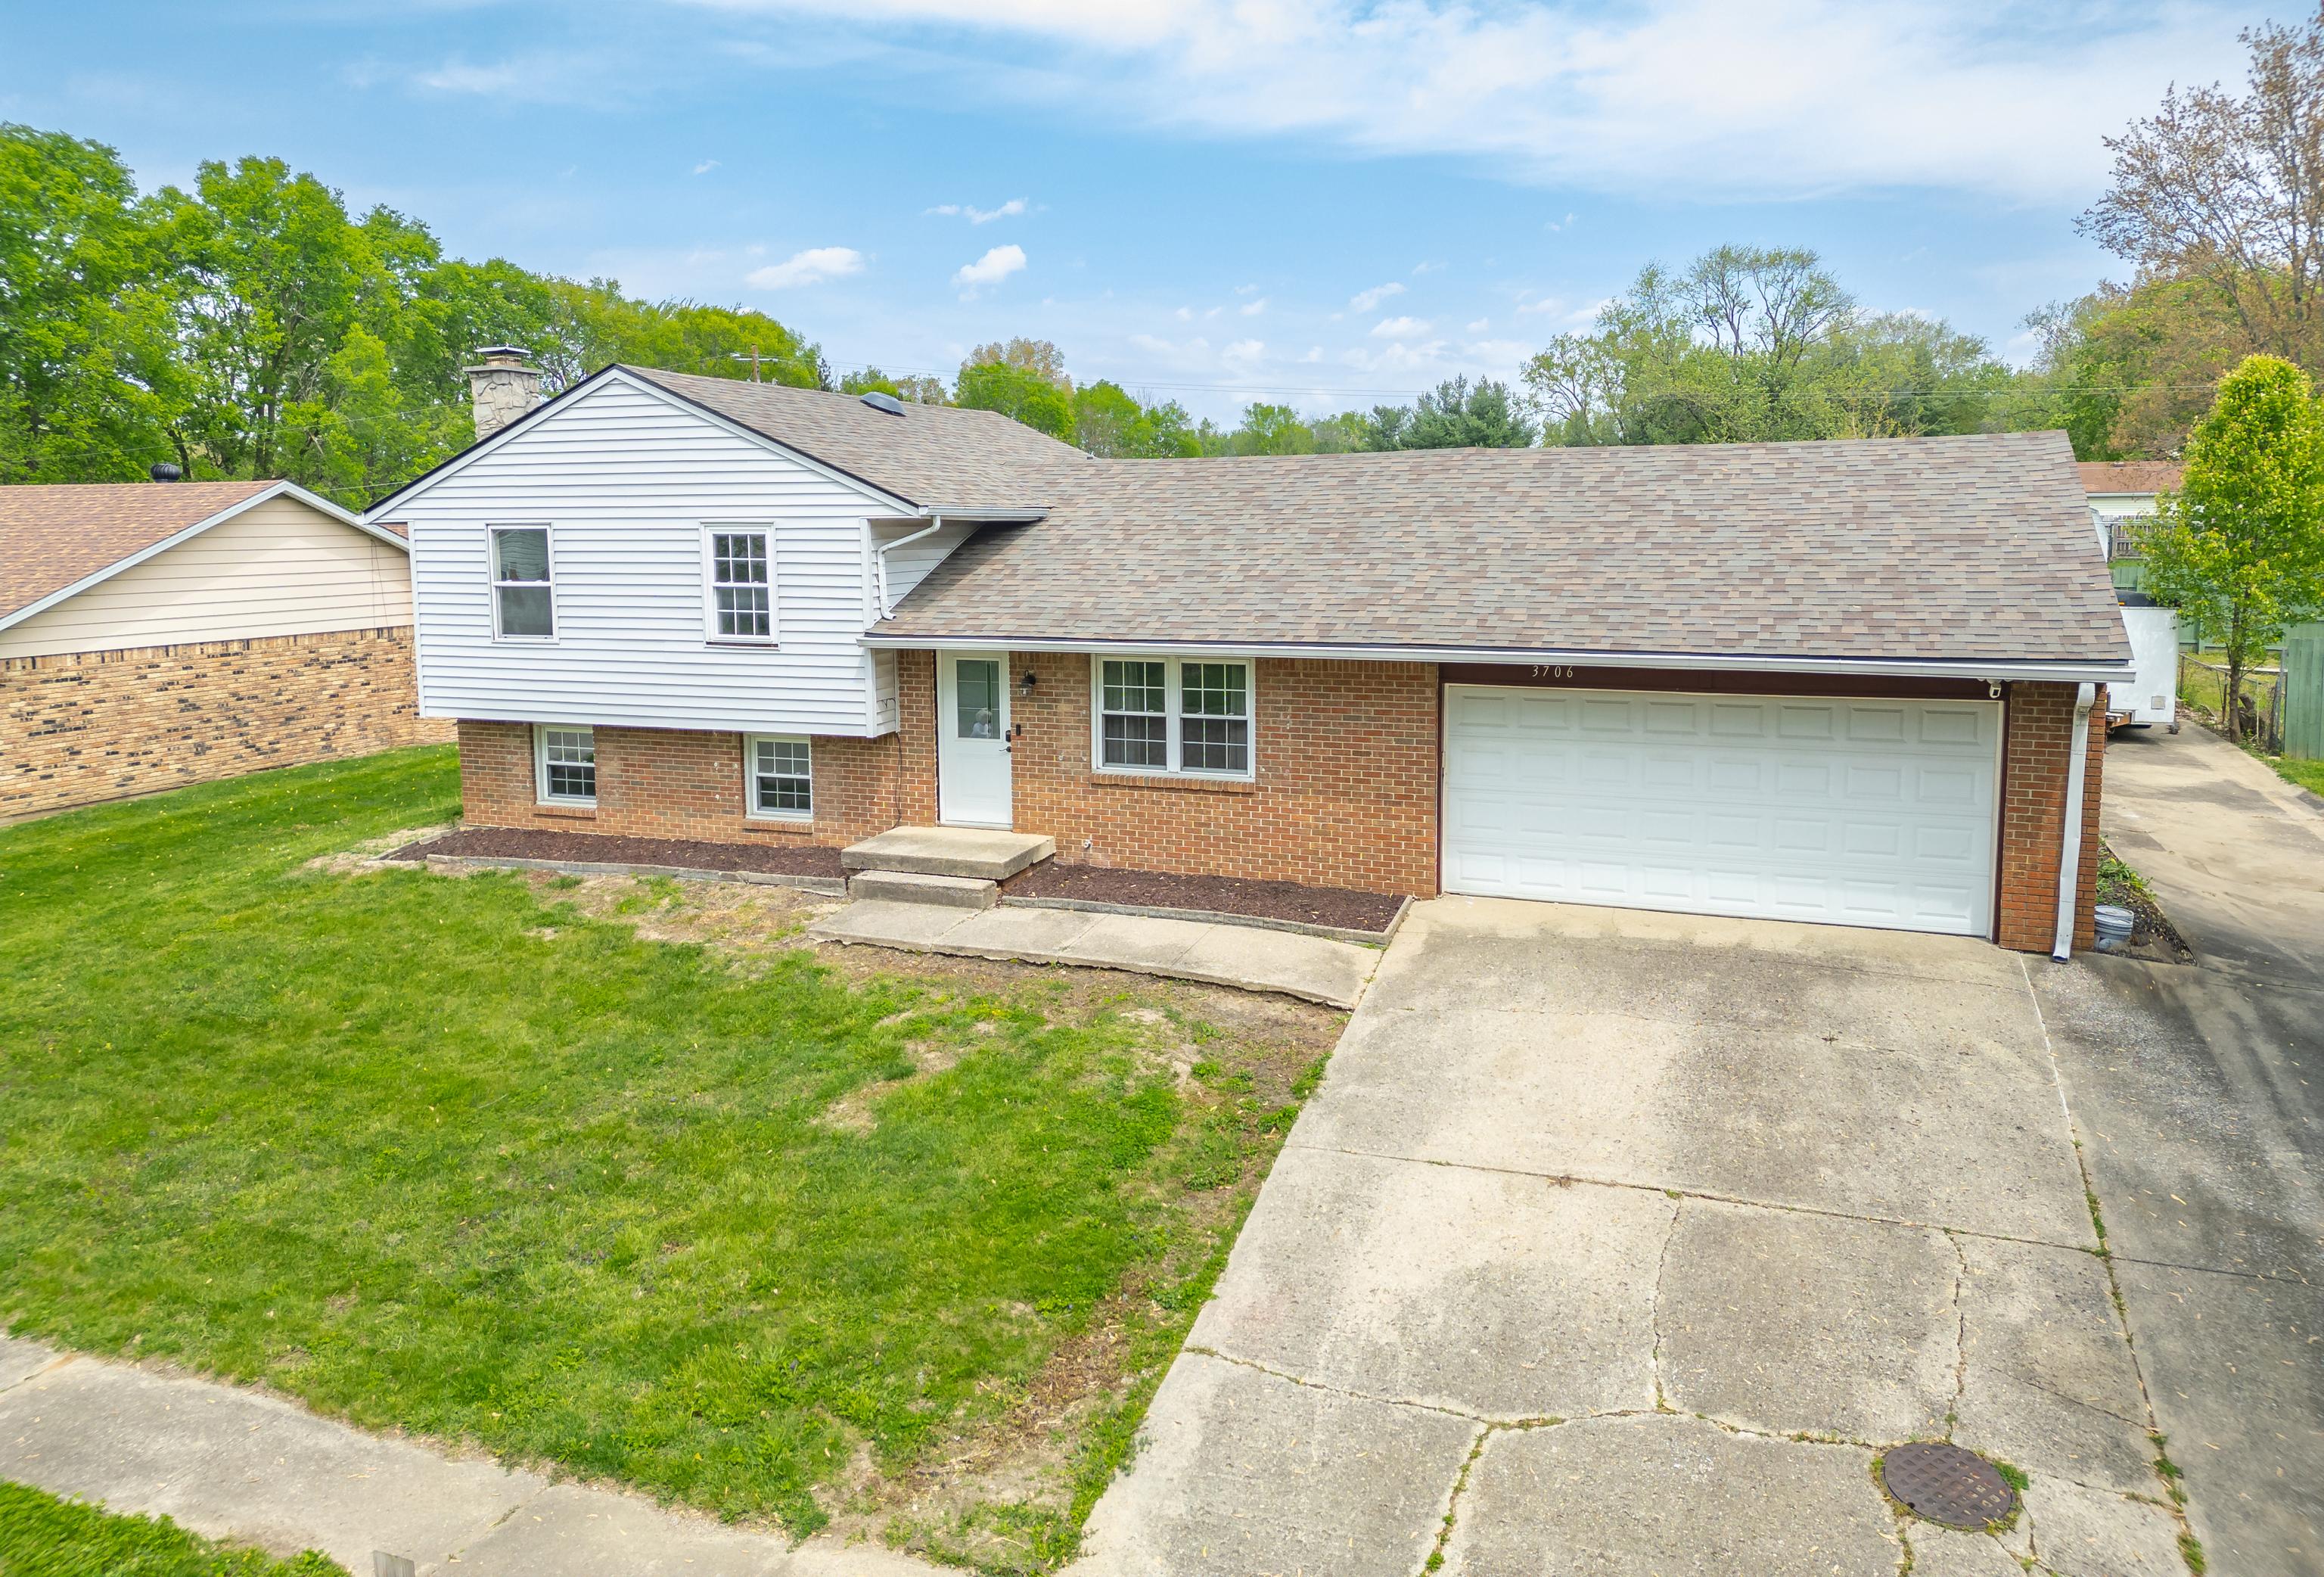 Photo one of 3706 Candy Cane Dr Indianapolis IN 46227 | MLS 21976395